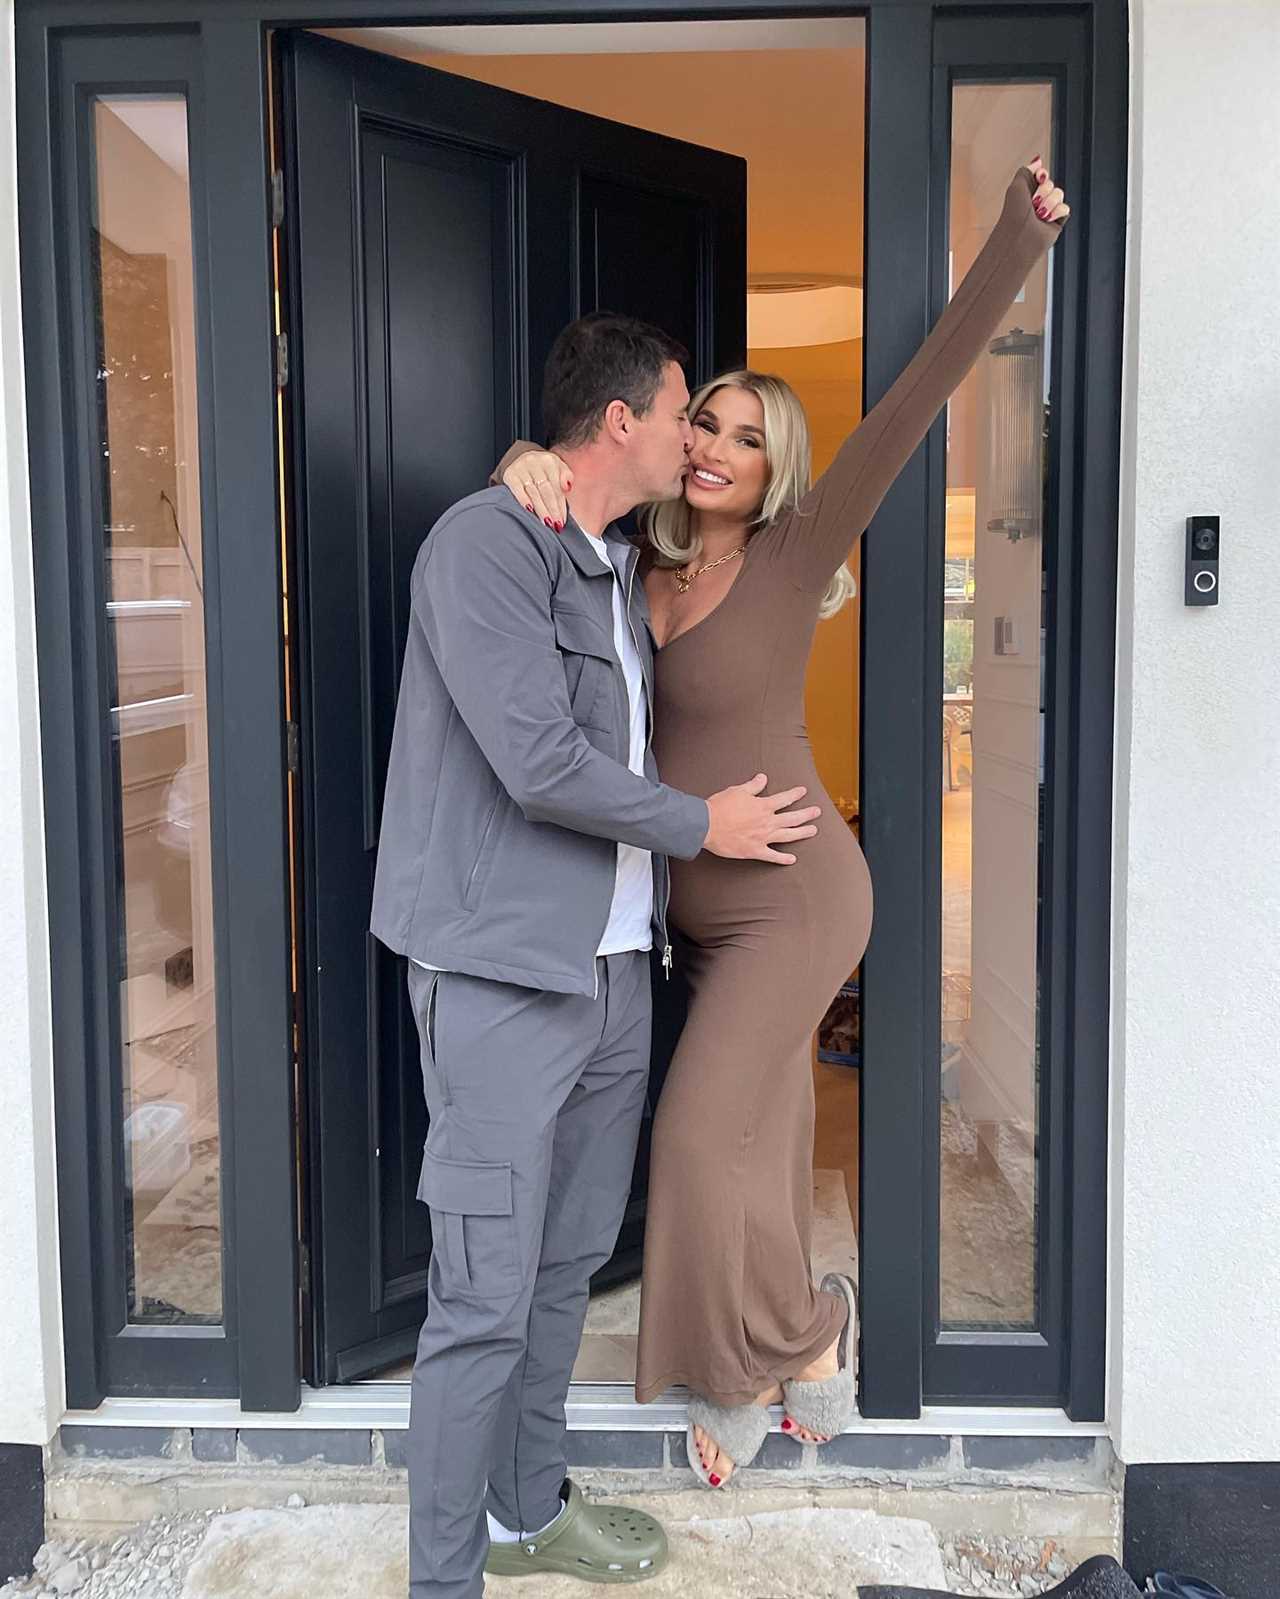 Billie Faiers confirms she’s FINALLY moved into £1.4m mansion after ‘a LOT of arguments’ & shares awkward bed situation